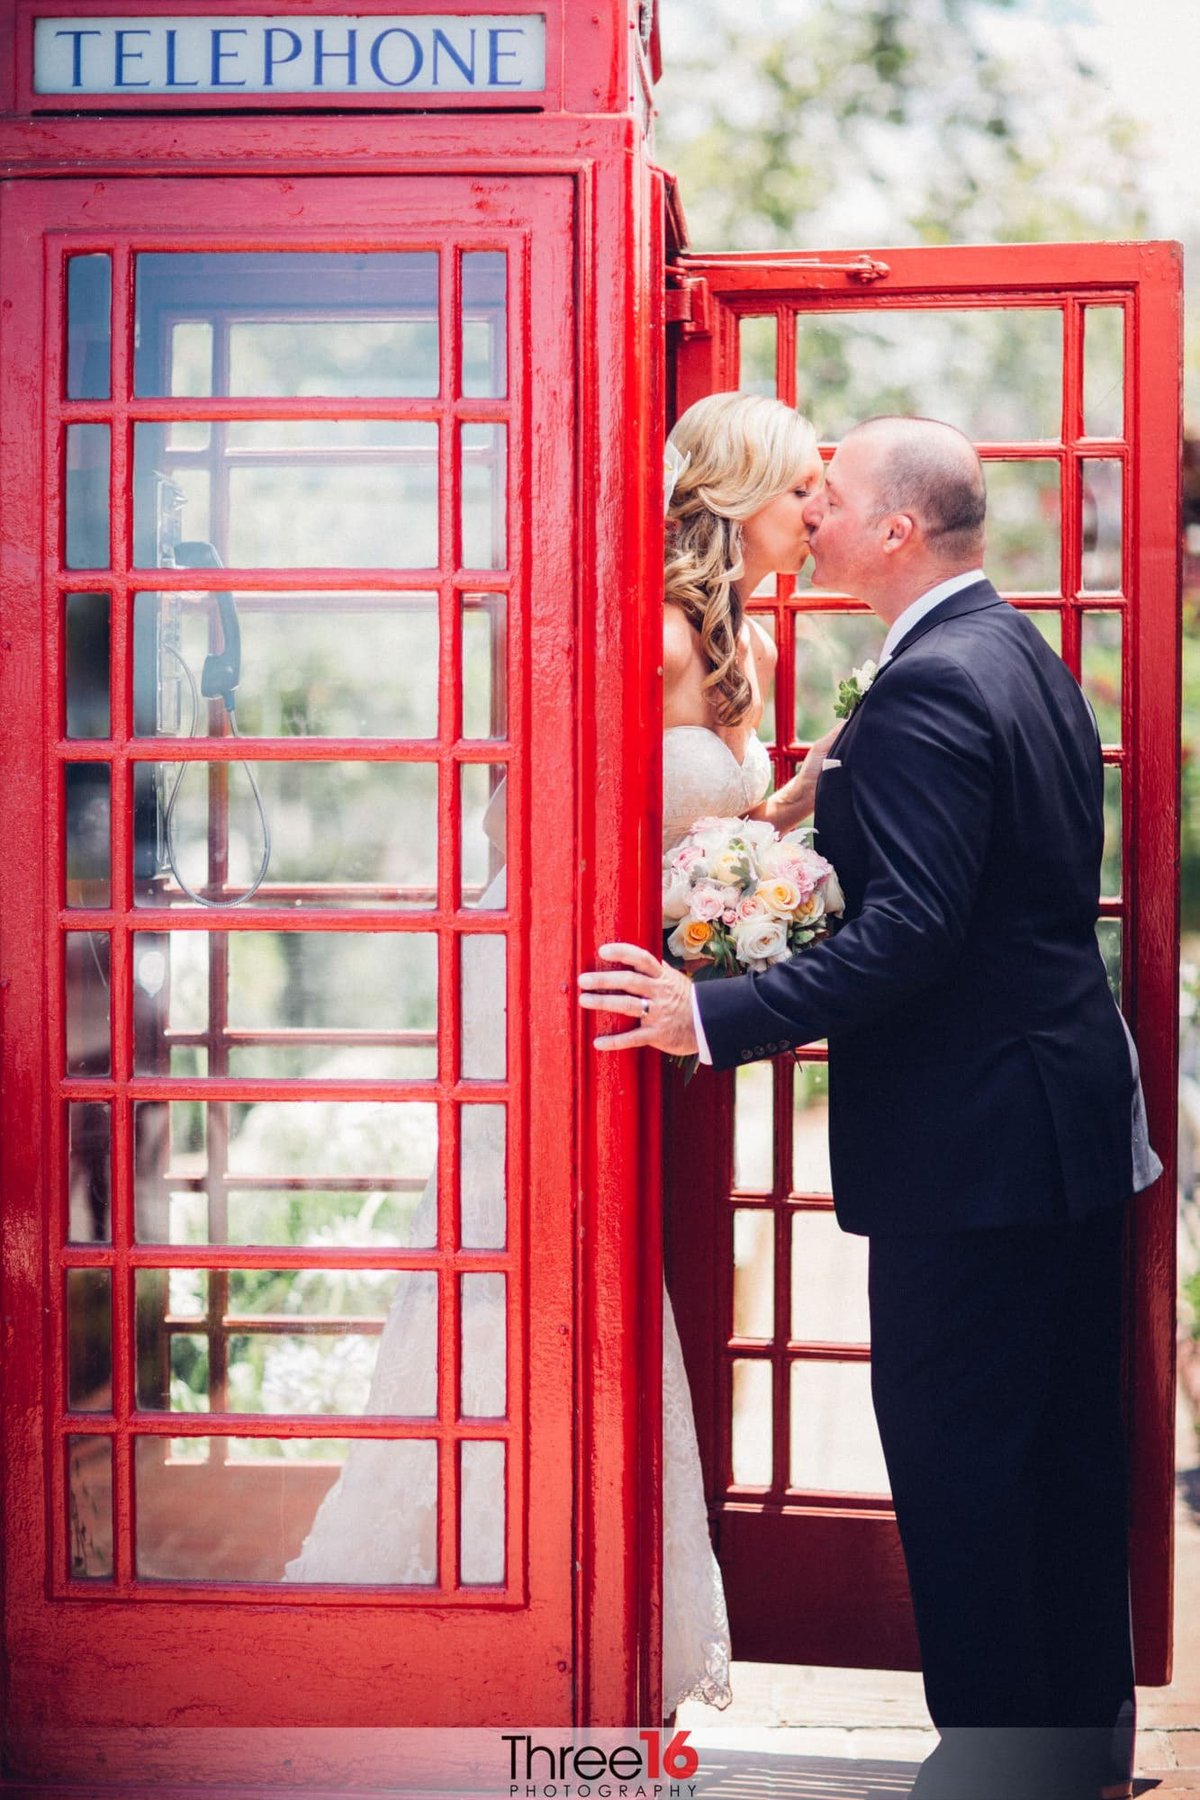 Bride and Groom share a kiss in an English-style phone booth